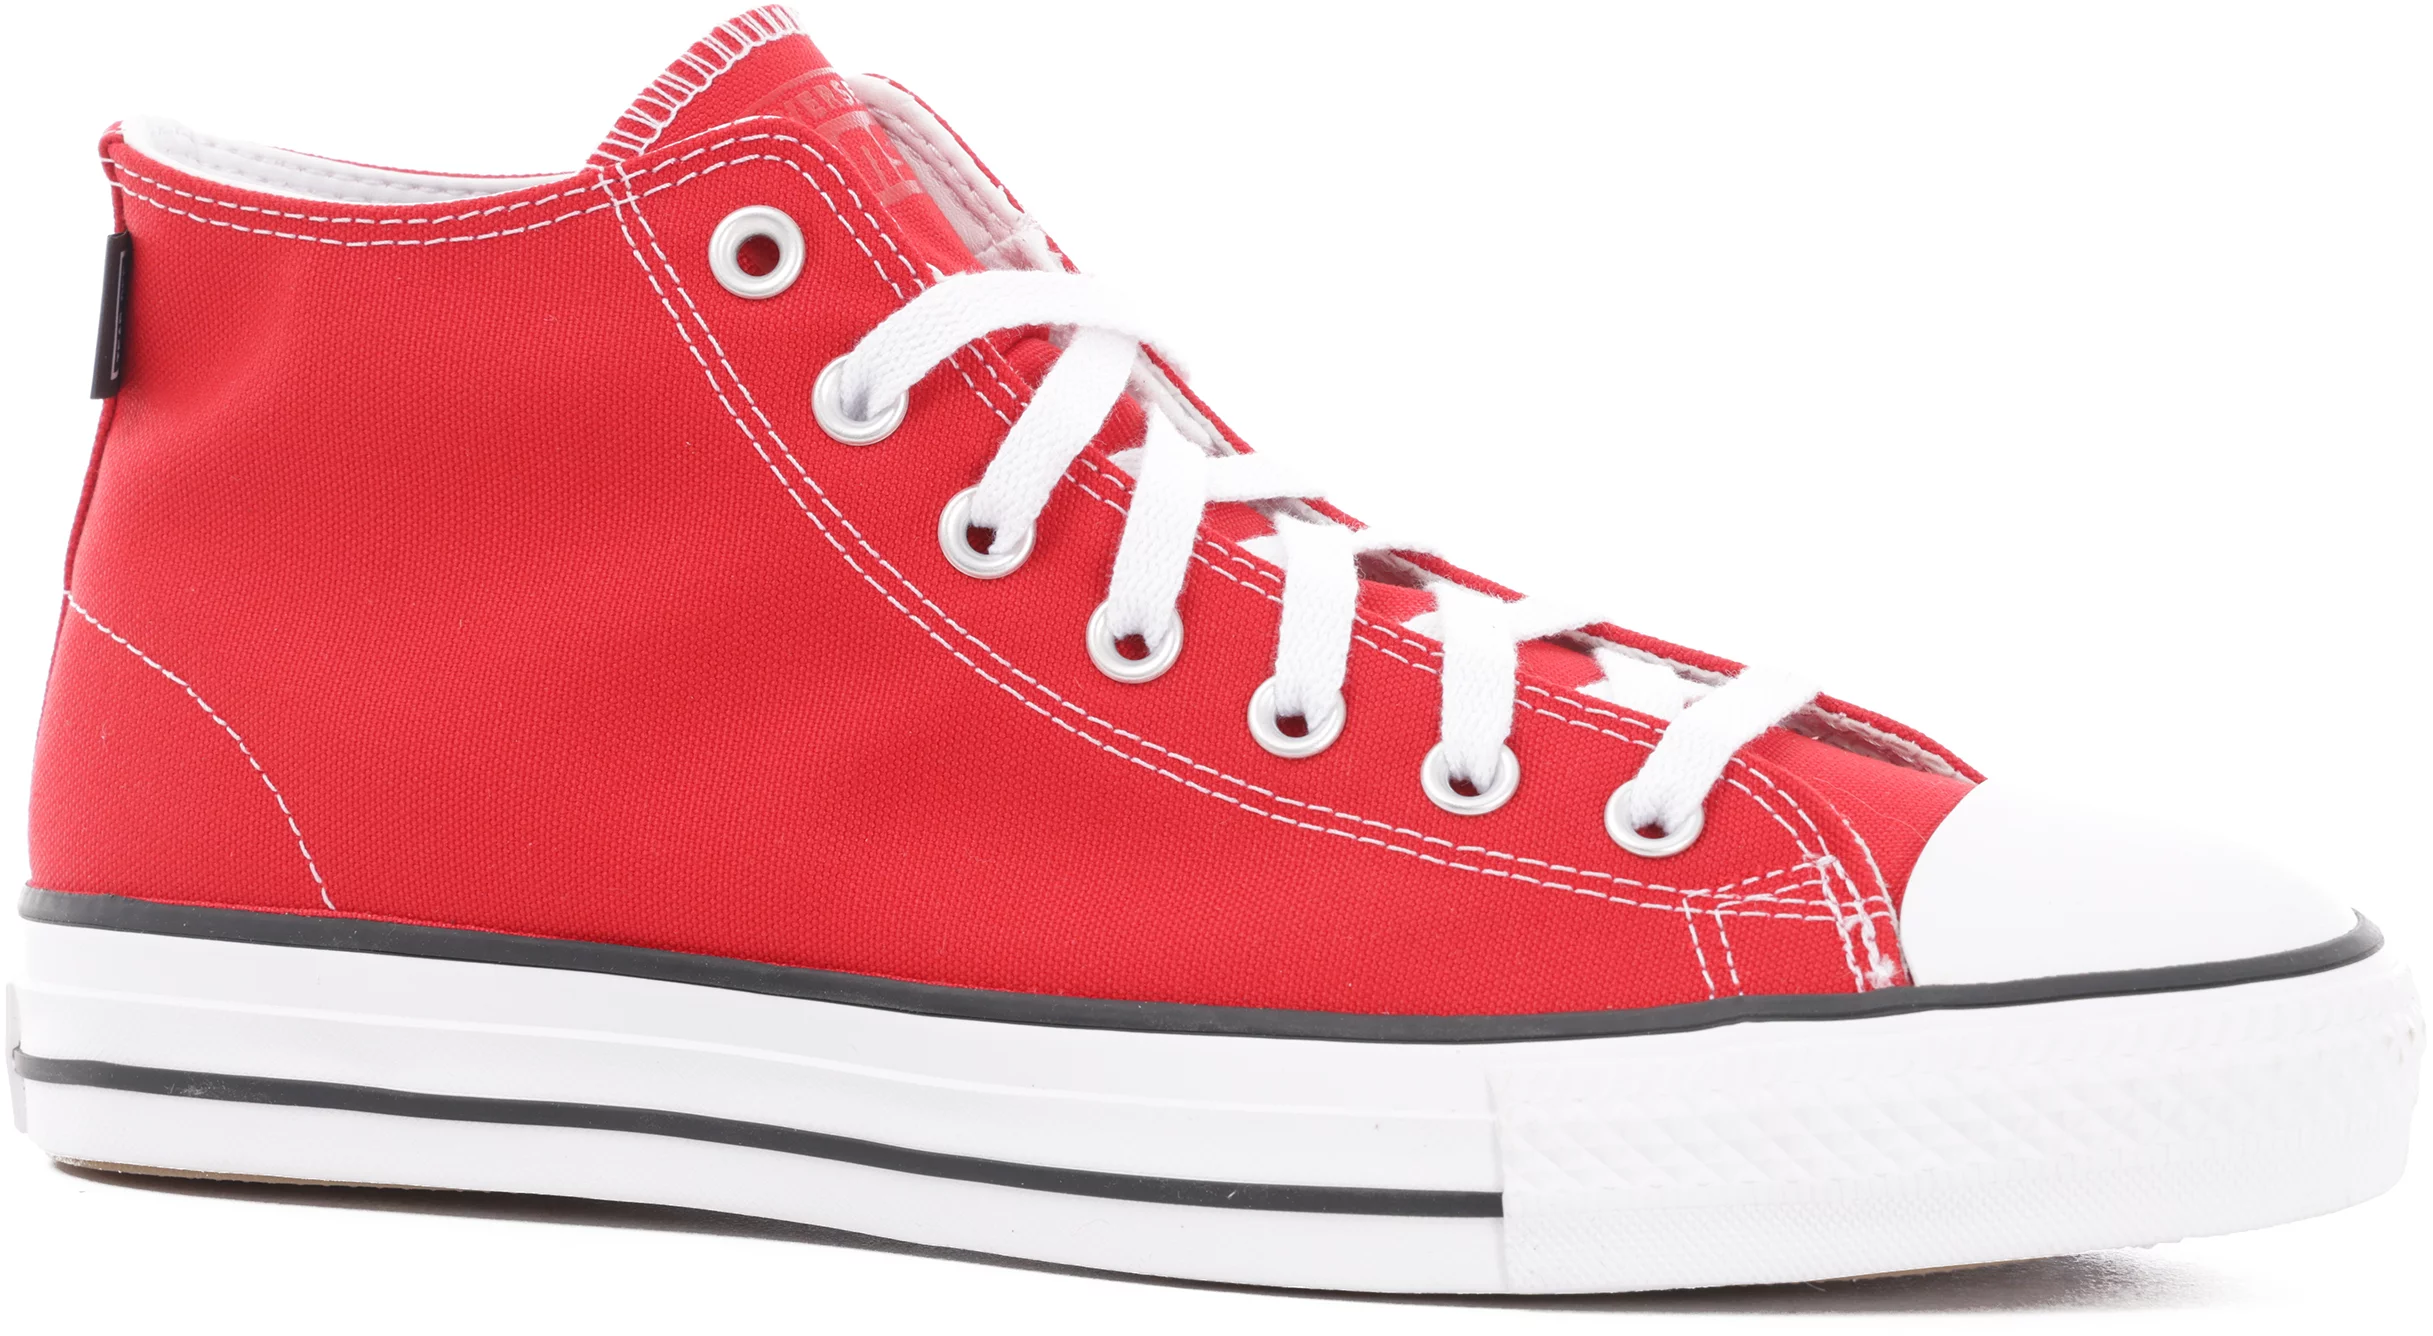 Converse Chuck Taylor All Star Mid Skate - university red/white/ black | Tactics